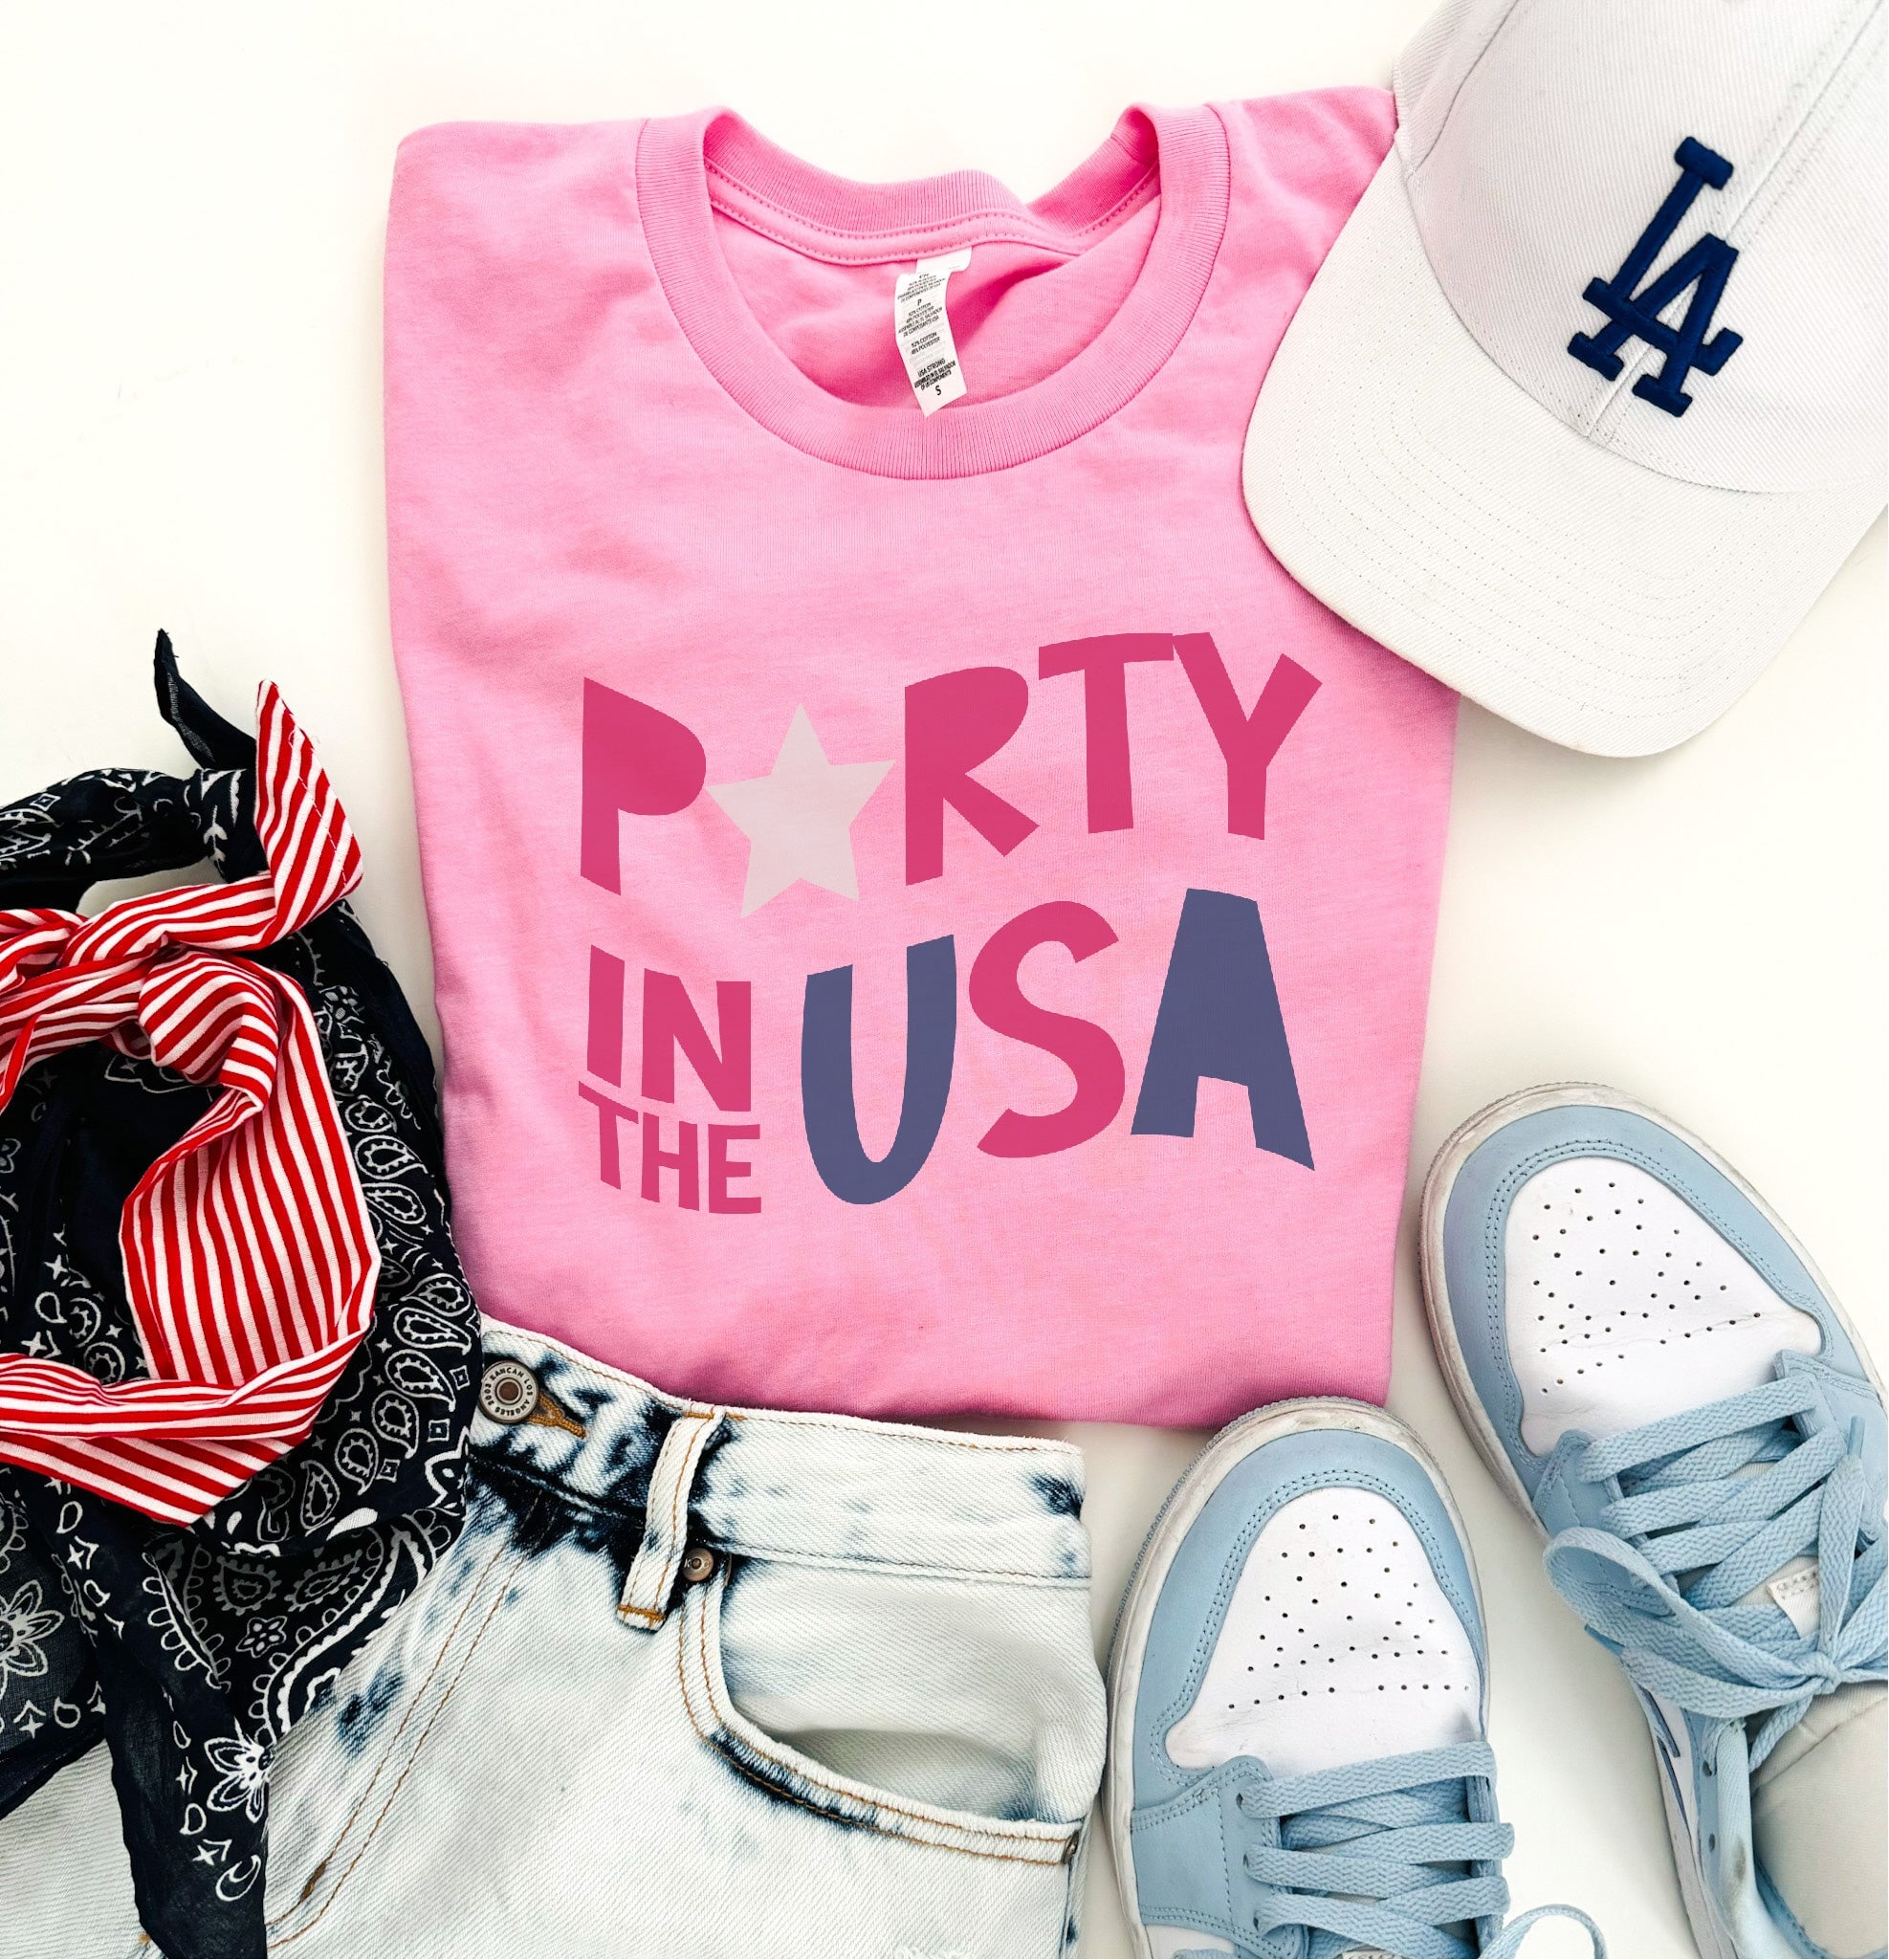 Party in the USA tee 4th of july collection Bella Canvas 3001 